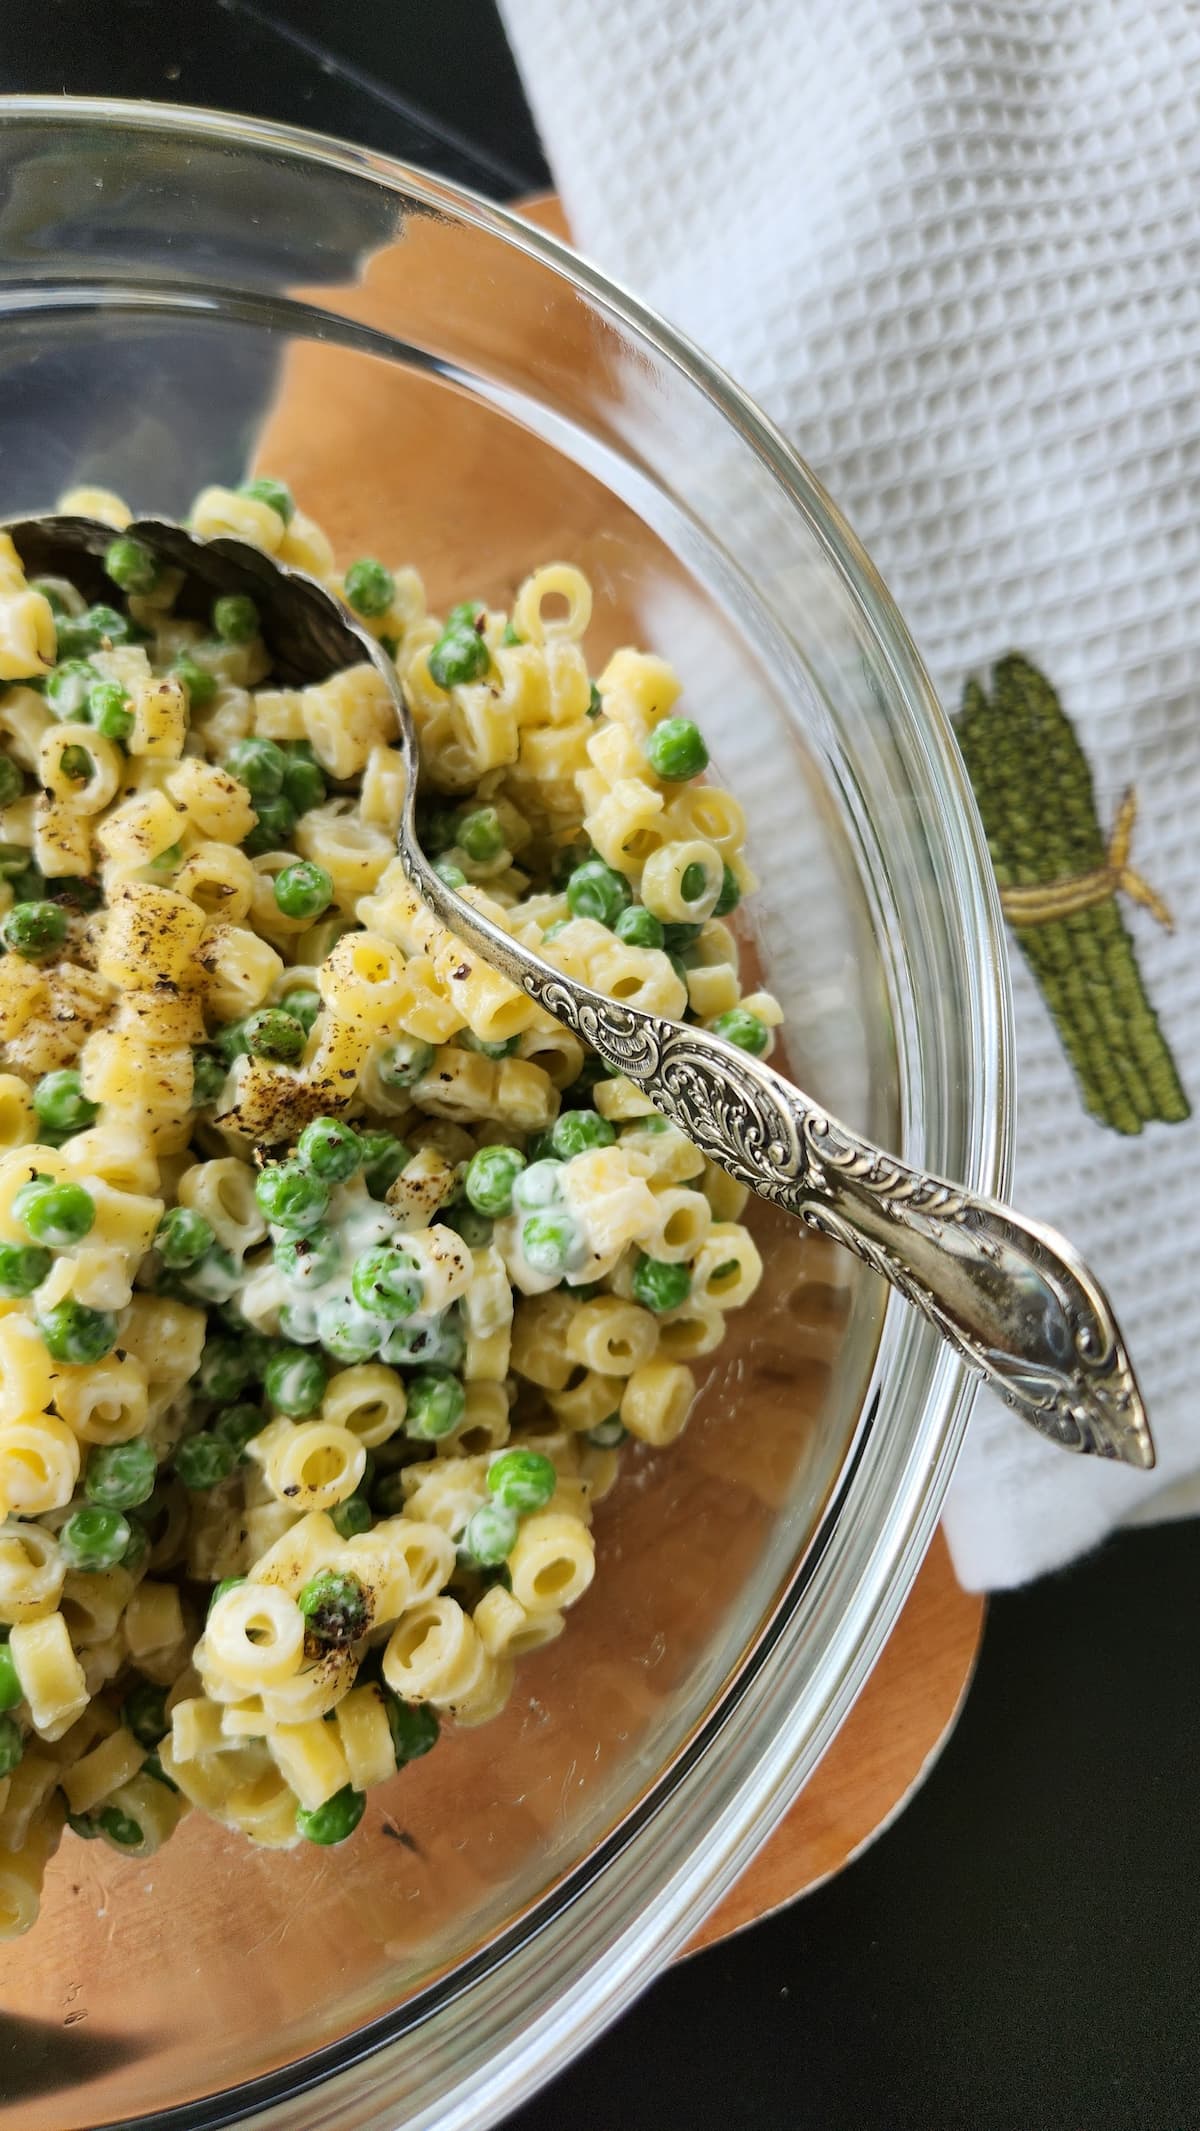 Easy Pasta and Peas Recipe Made With Only 3 Ingredients